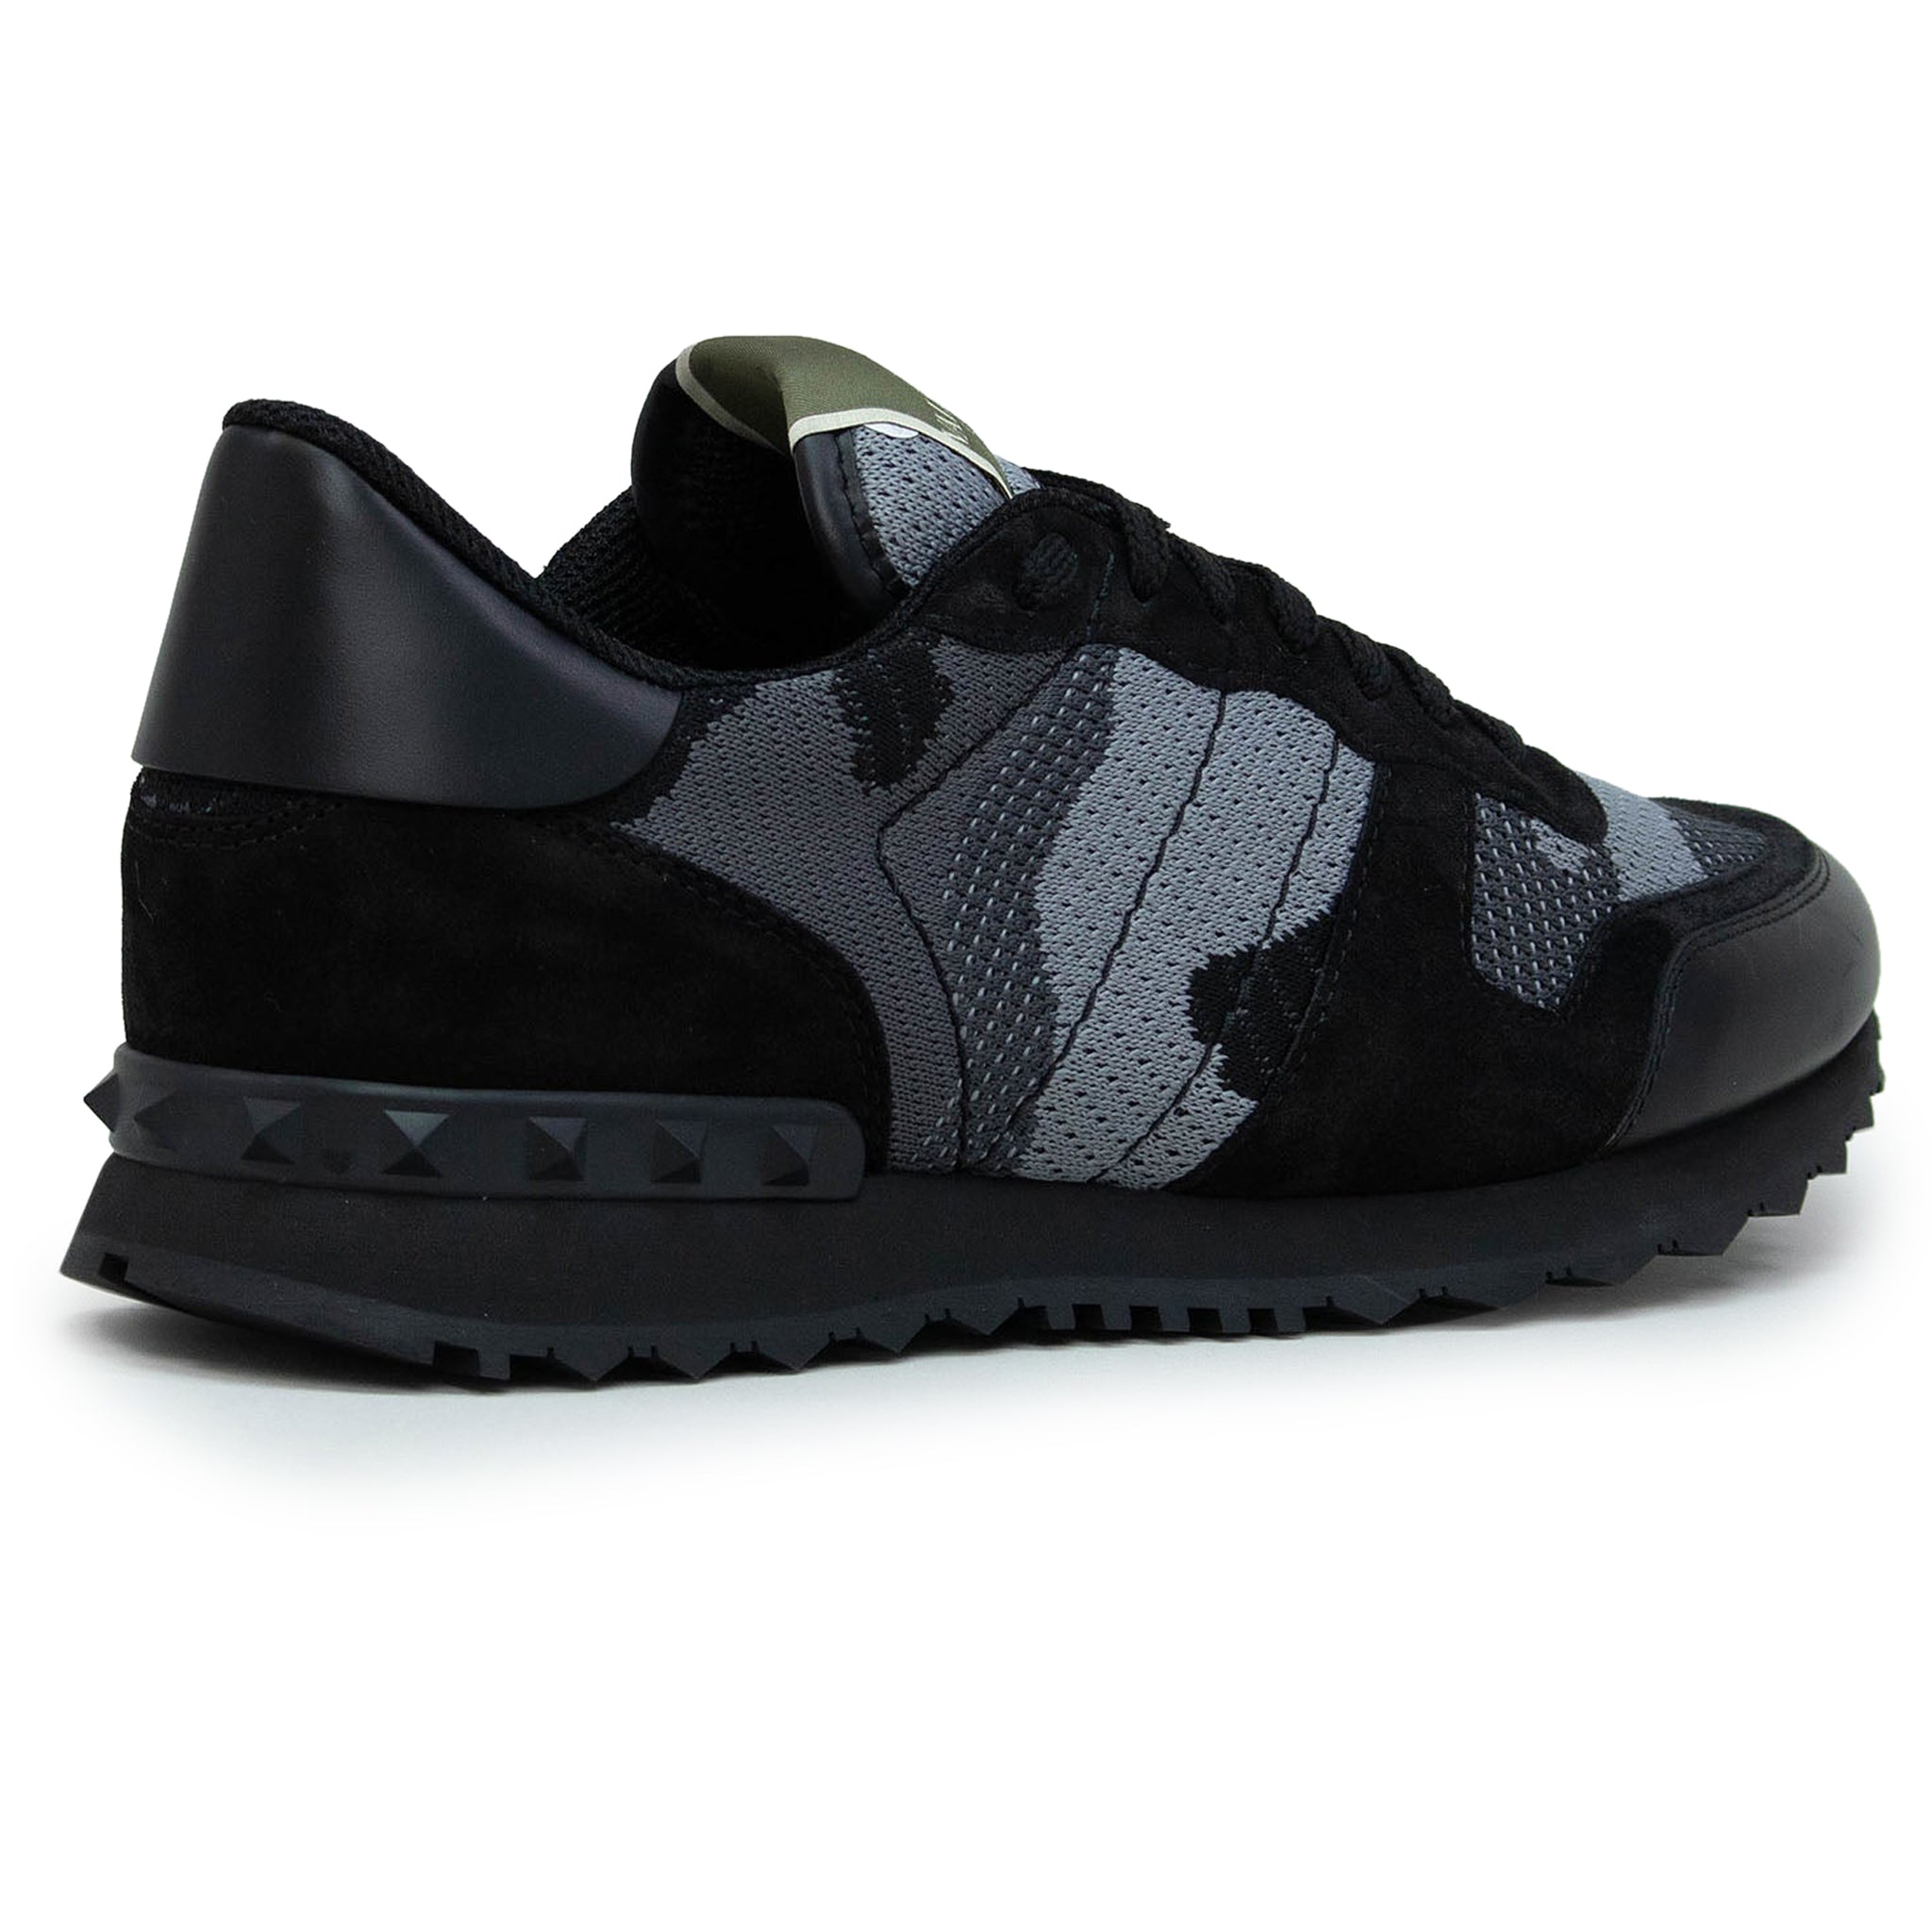 Image of Trapeze valentino Rockrunner Camouflage Black Mesh Sneaker